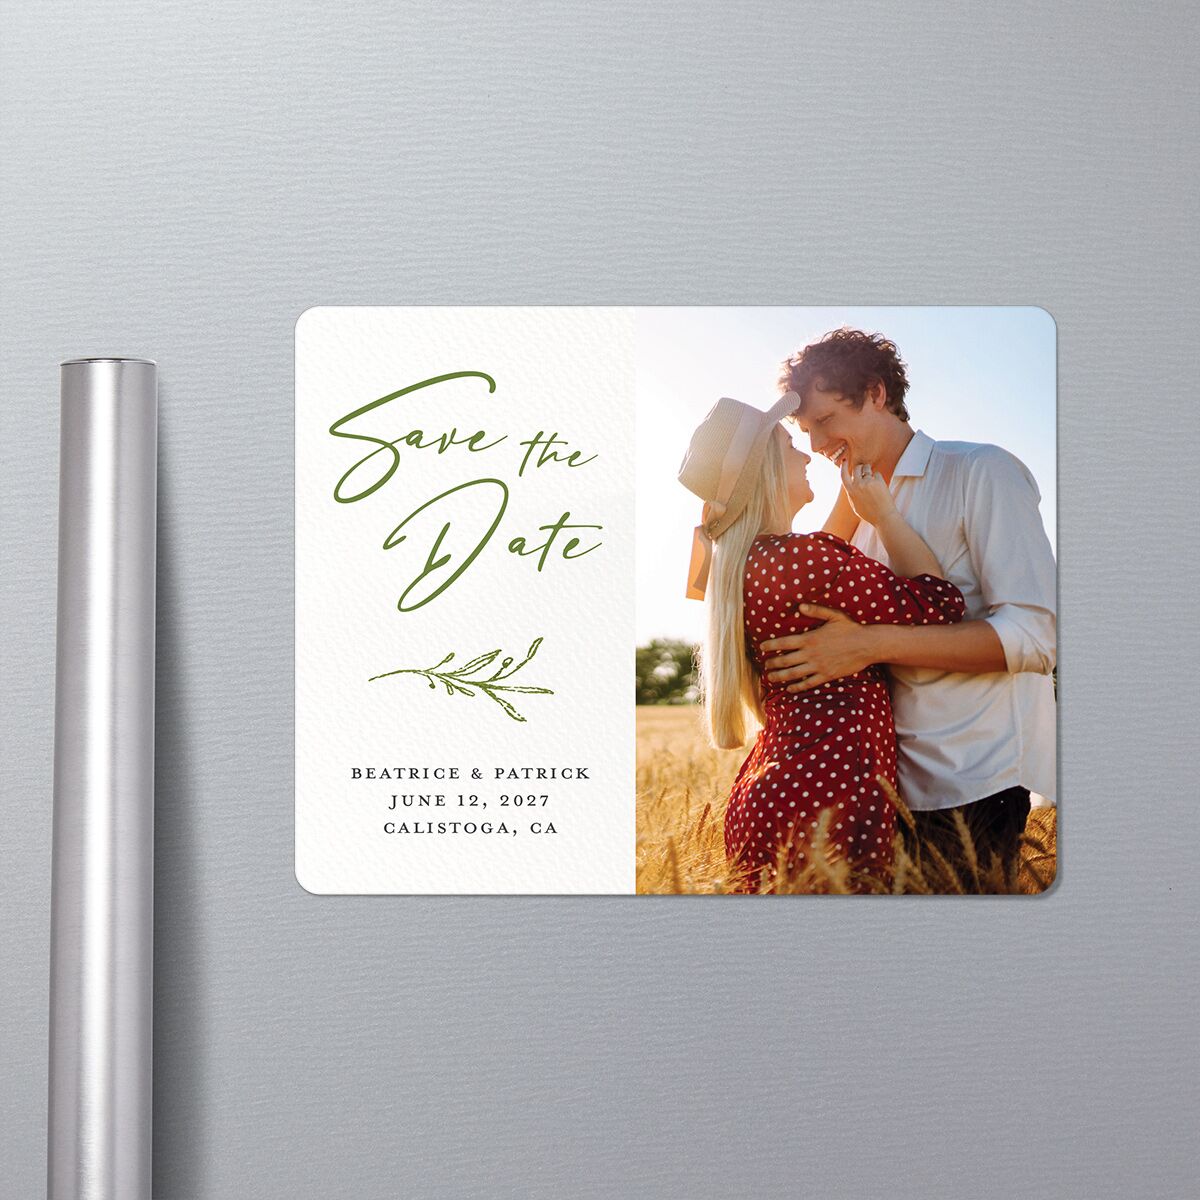 Romantic Setting Save The Date Magnets in-situ in Green